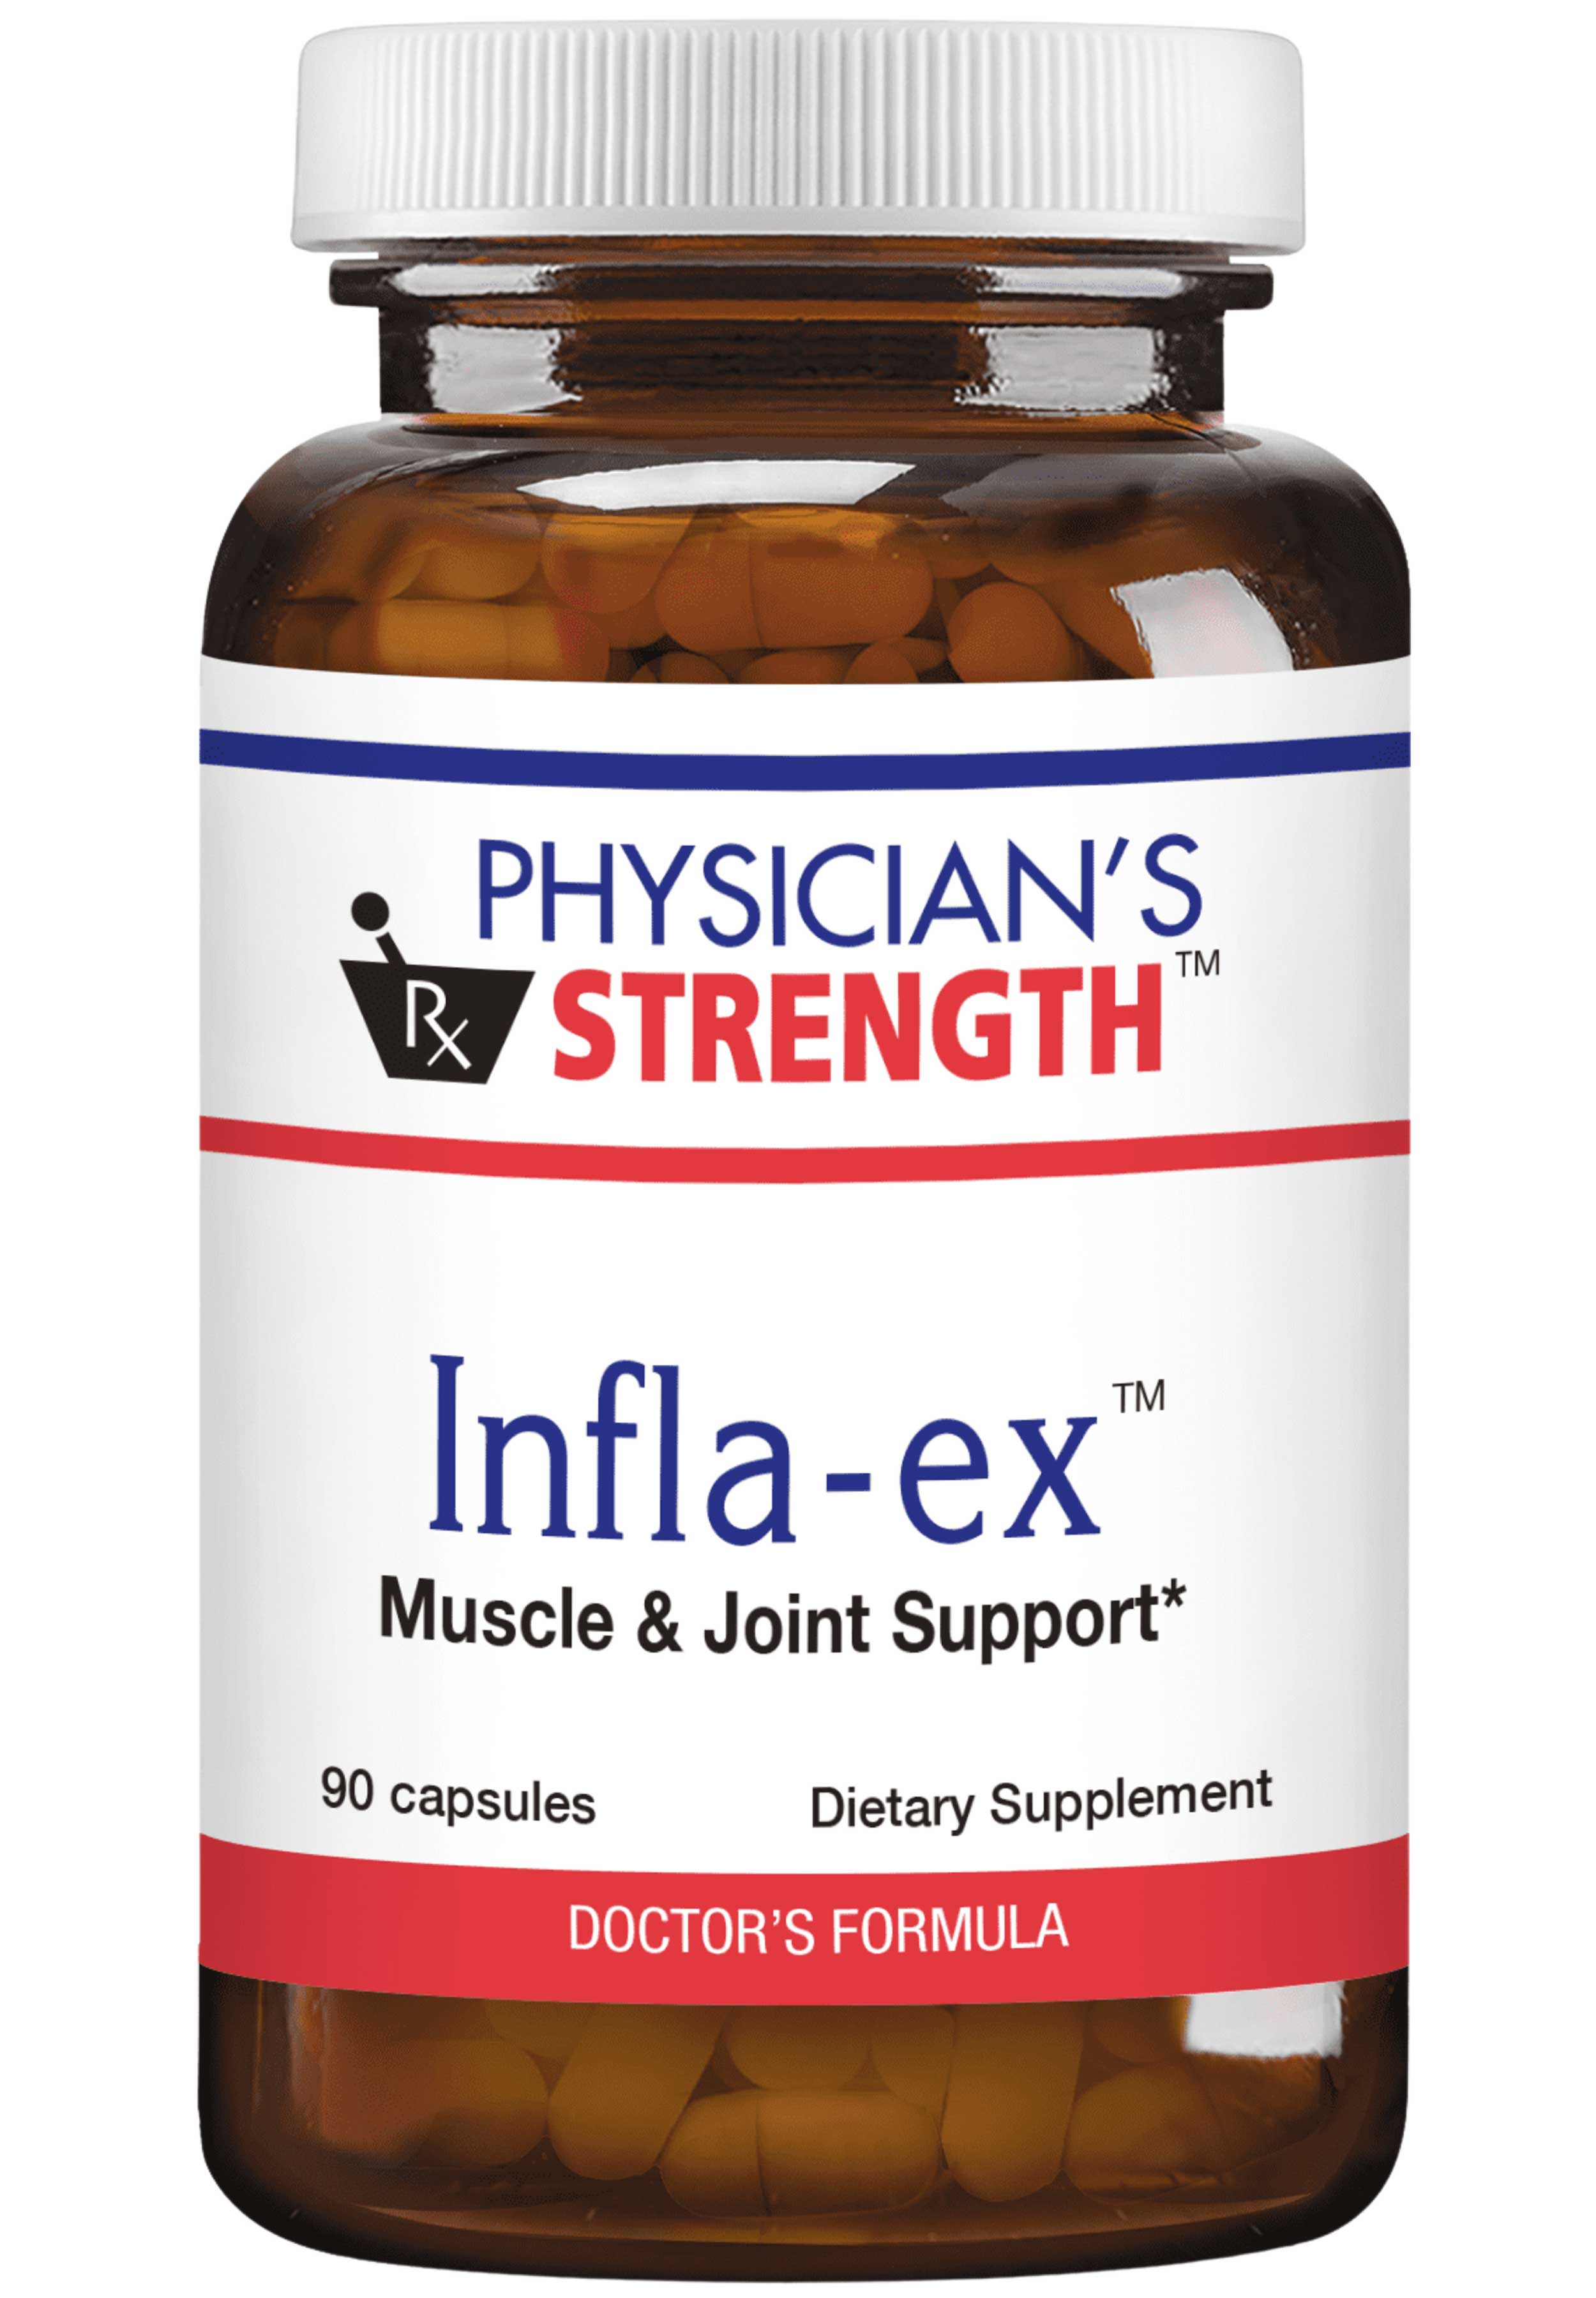 Physician's Strength Infla-ex